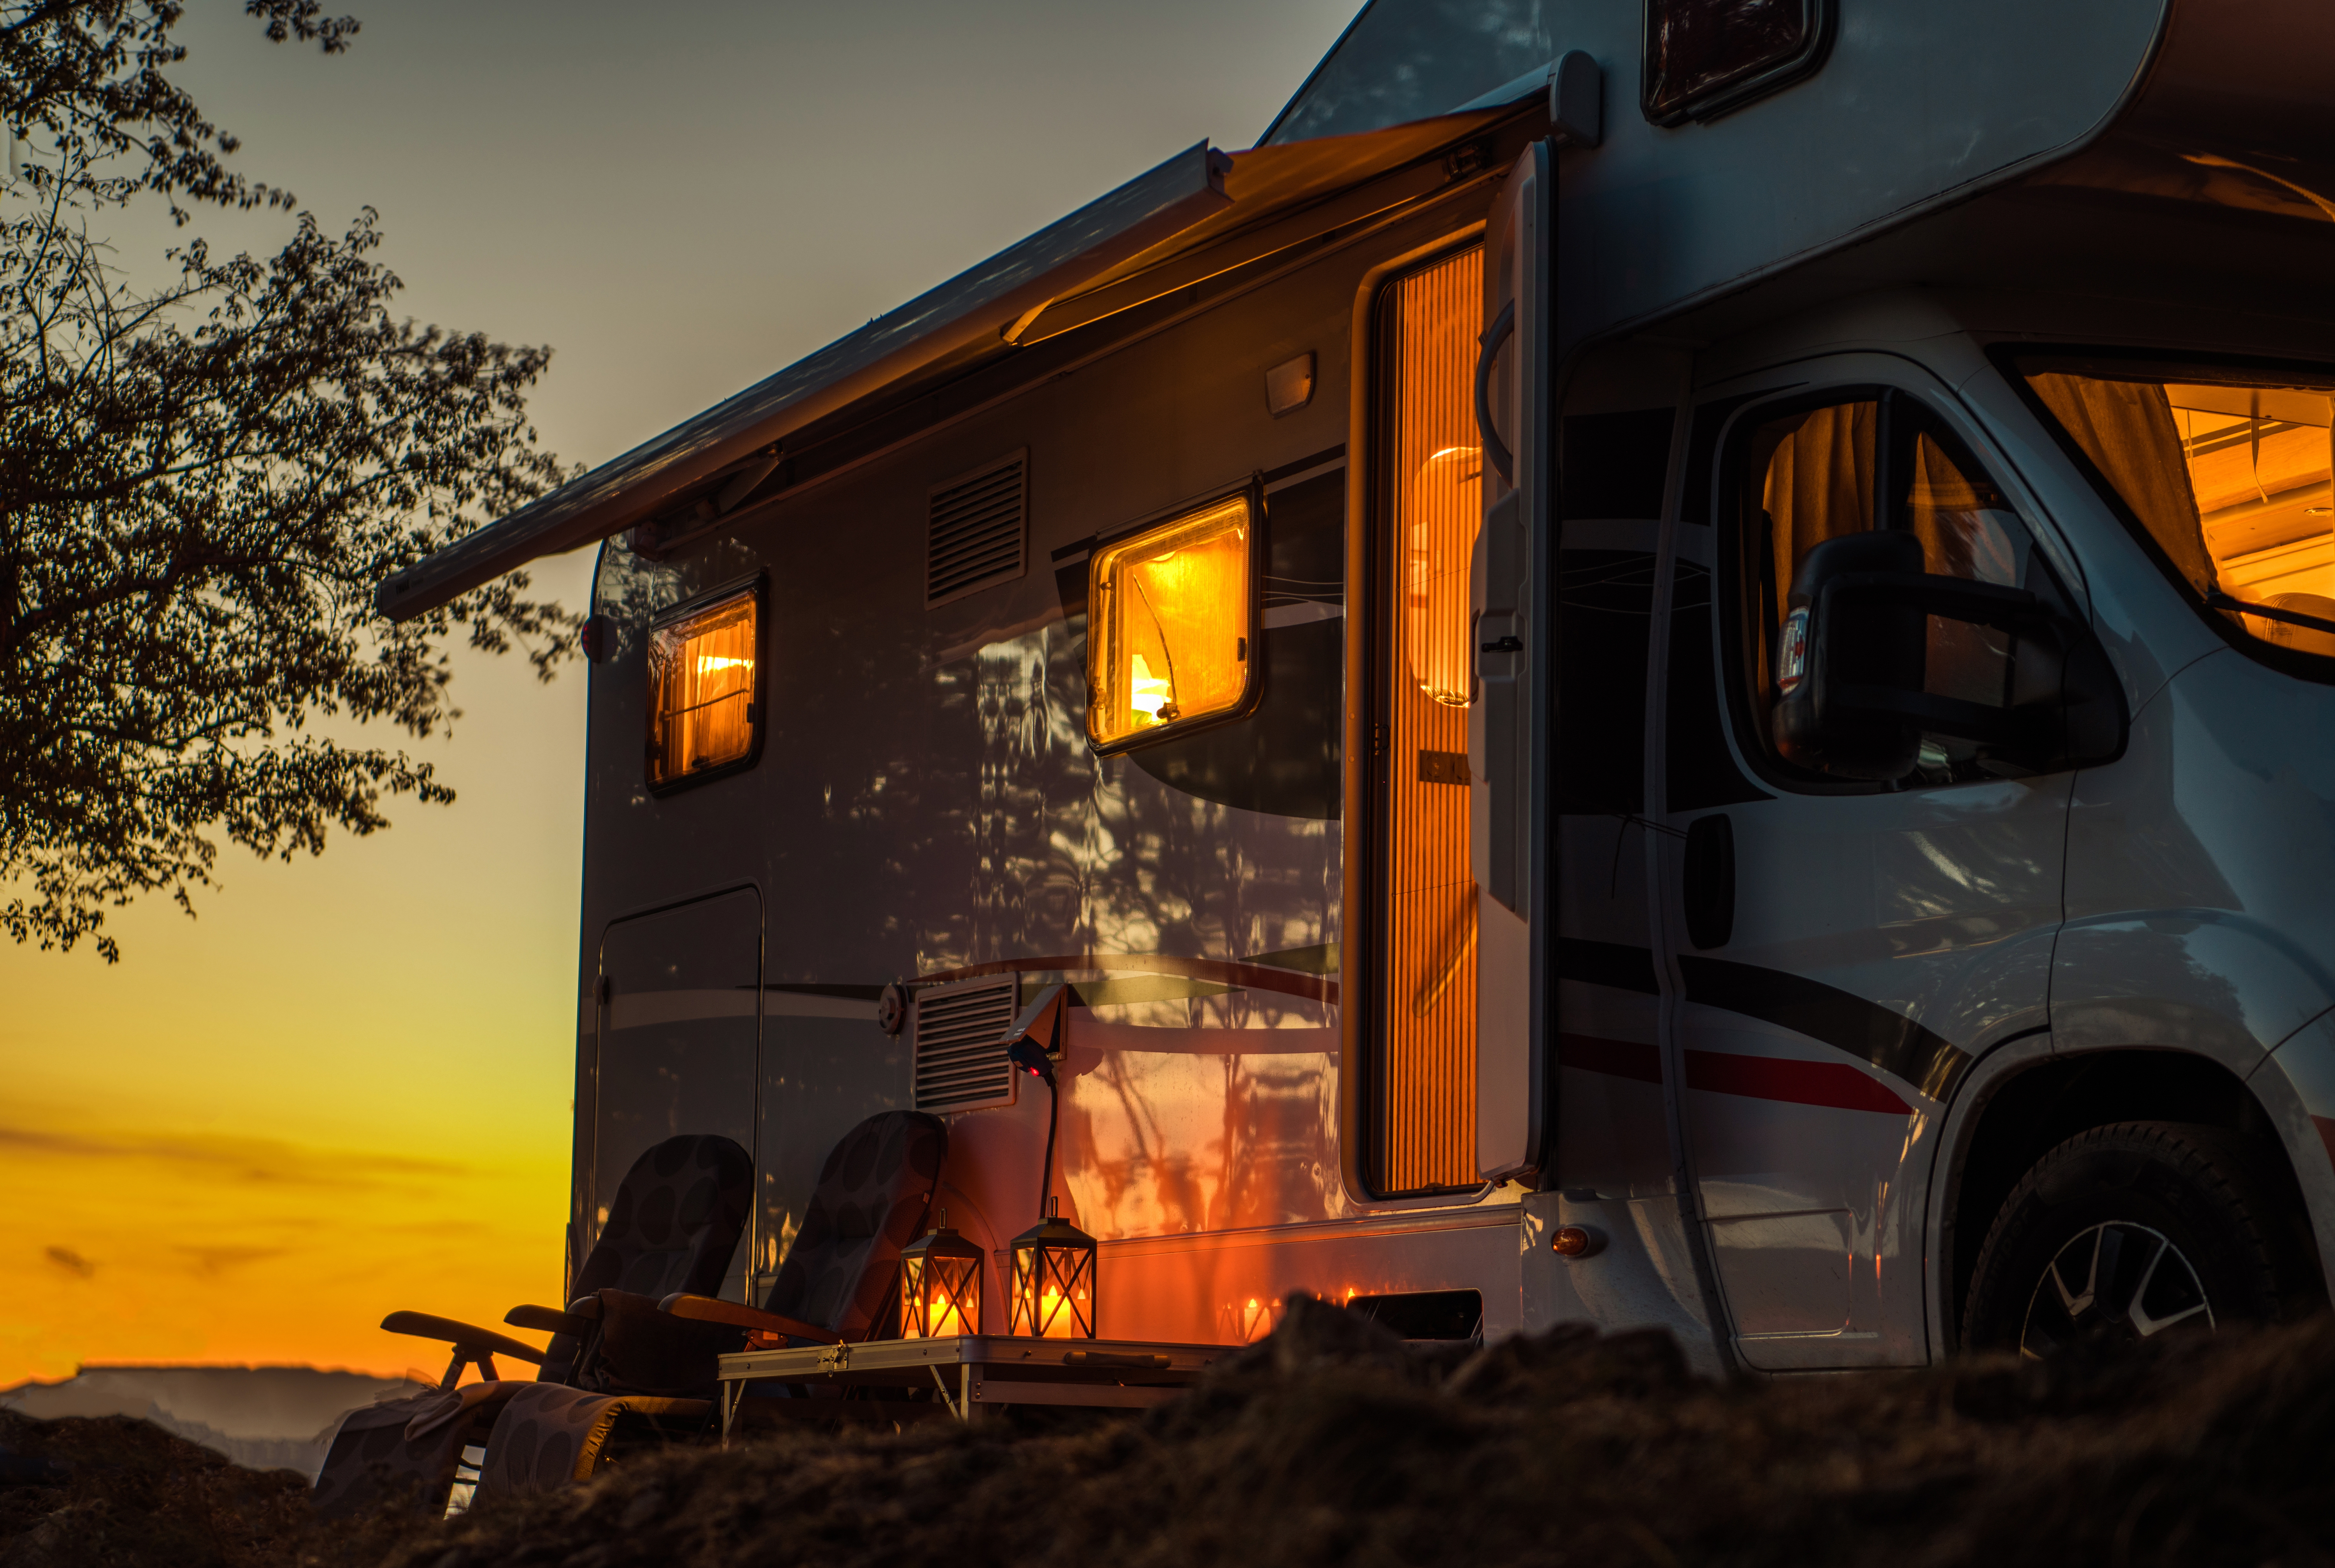 How 3D Printing Meets the Customization Needs of Recreational Vehicles